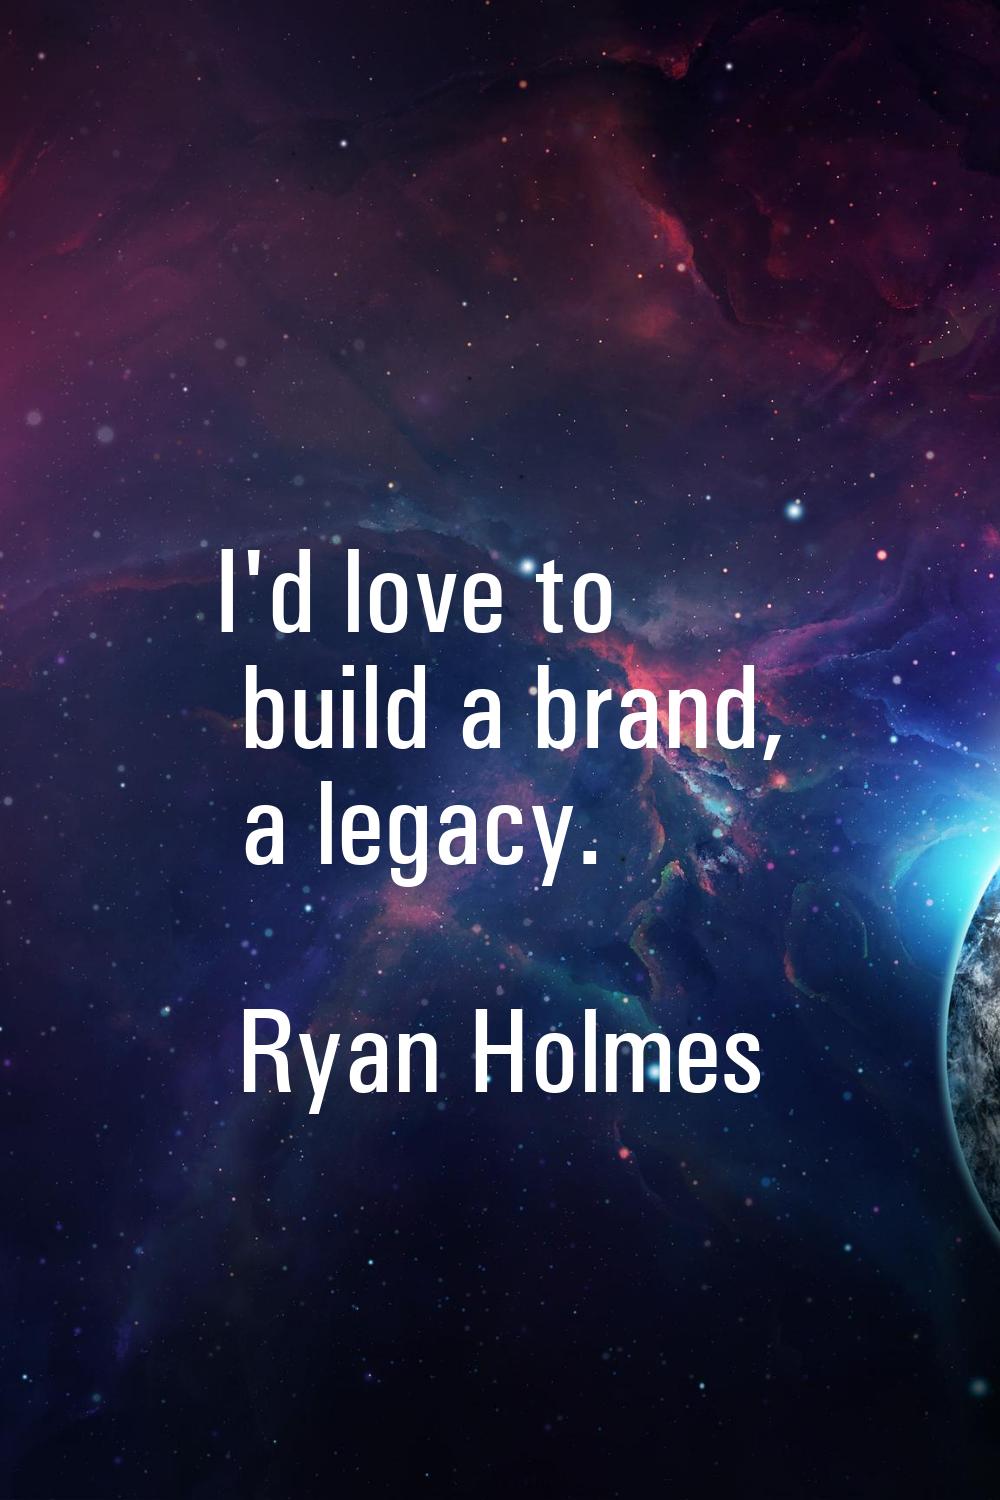 I'd love to build a brand, a legacy.